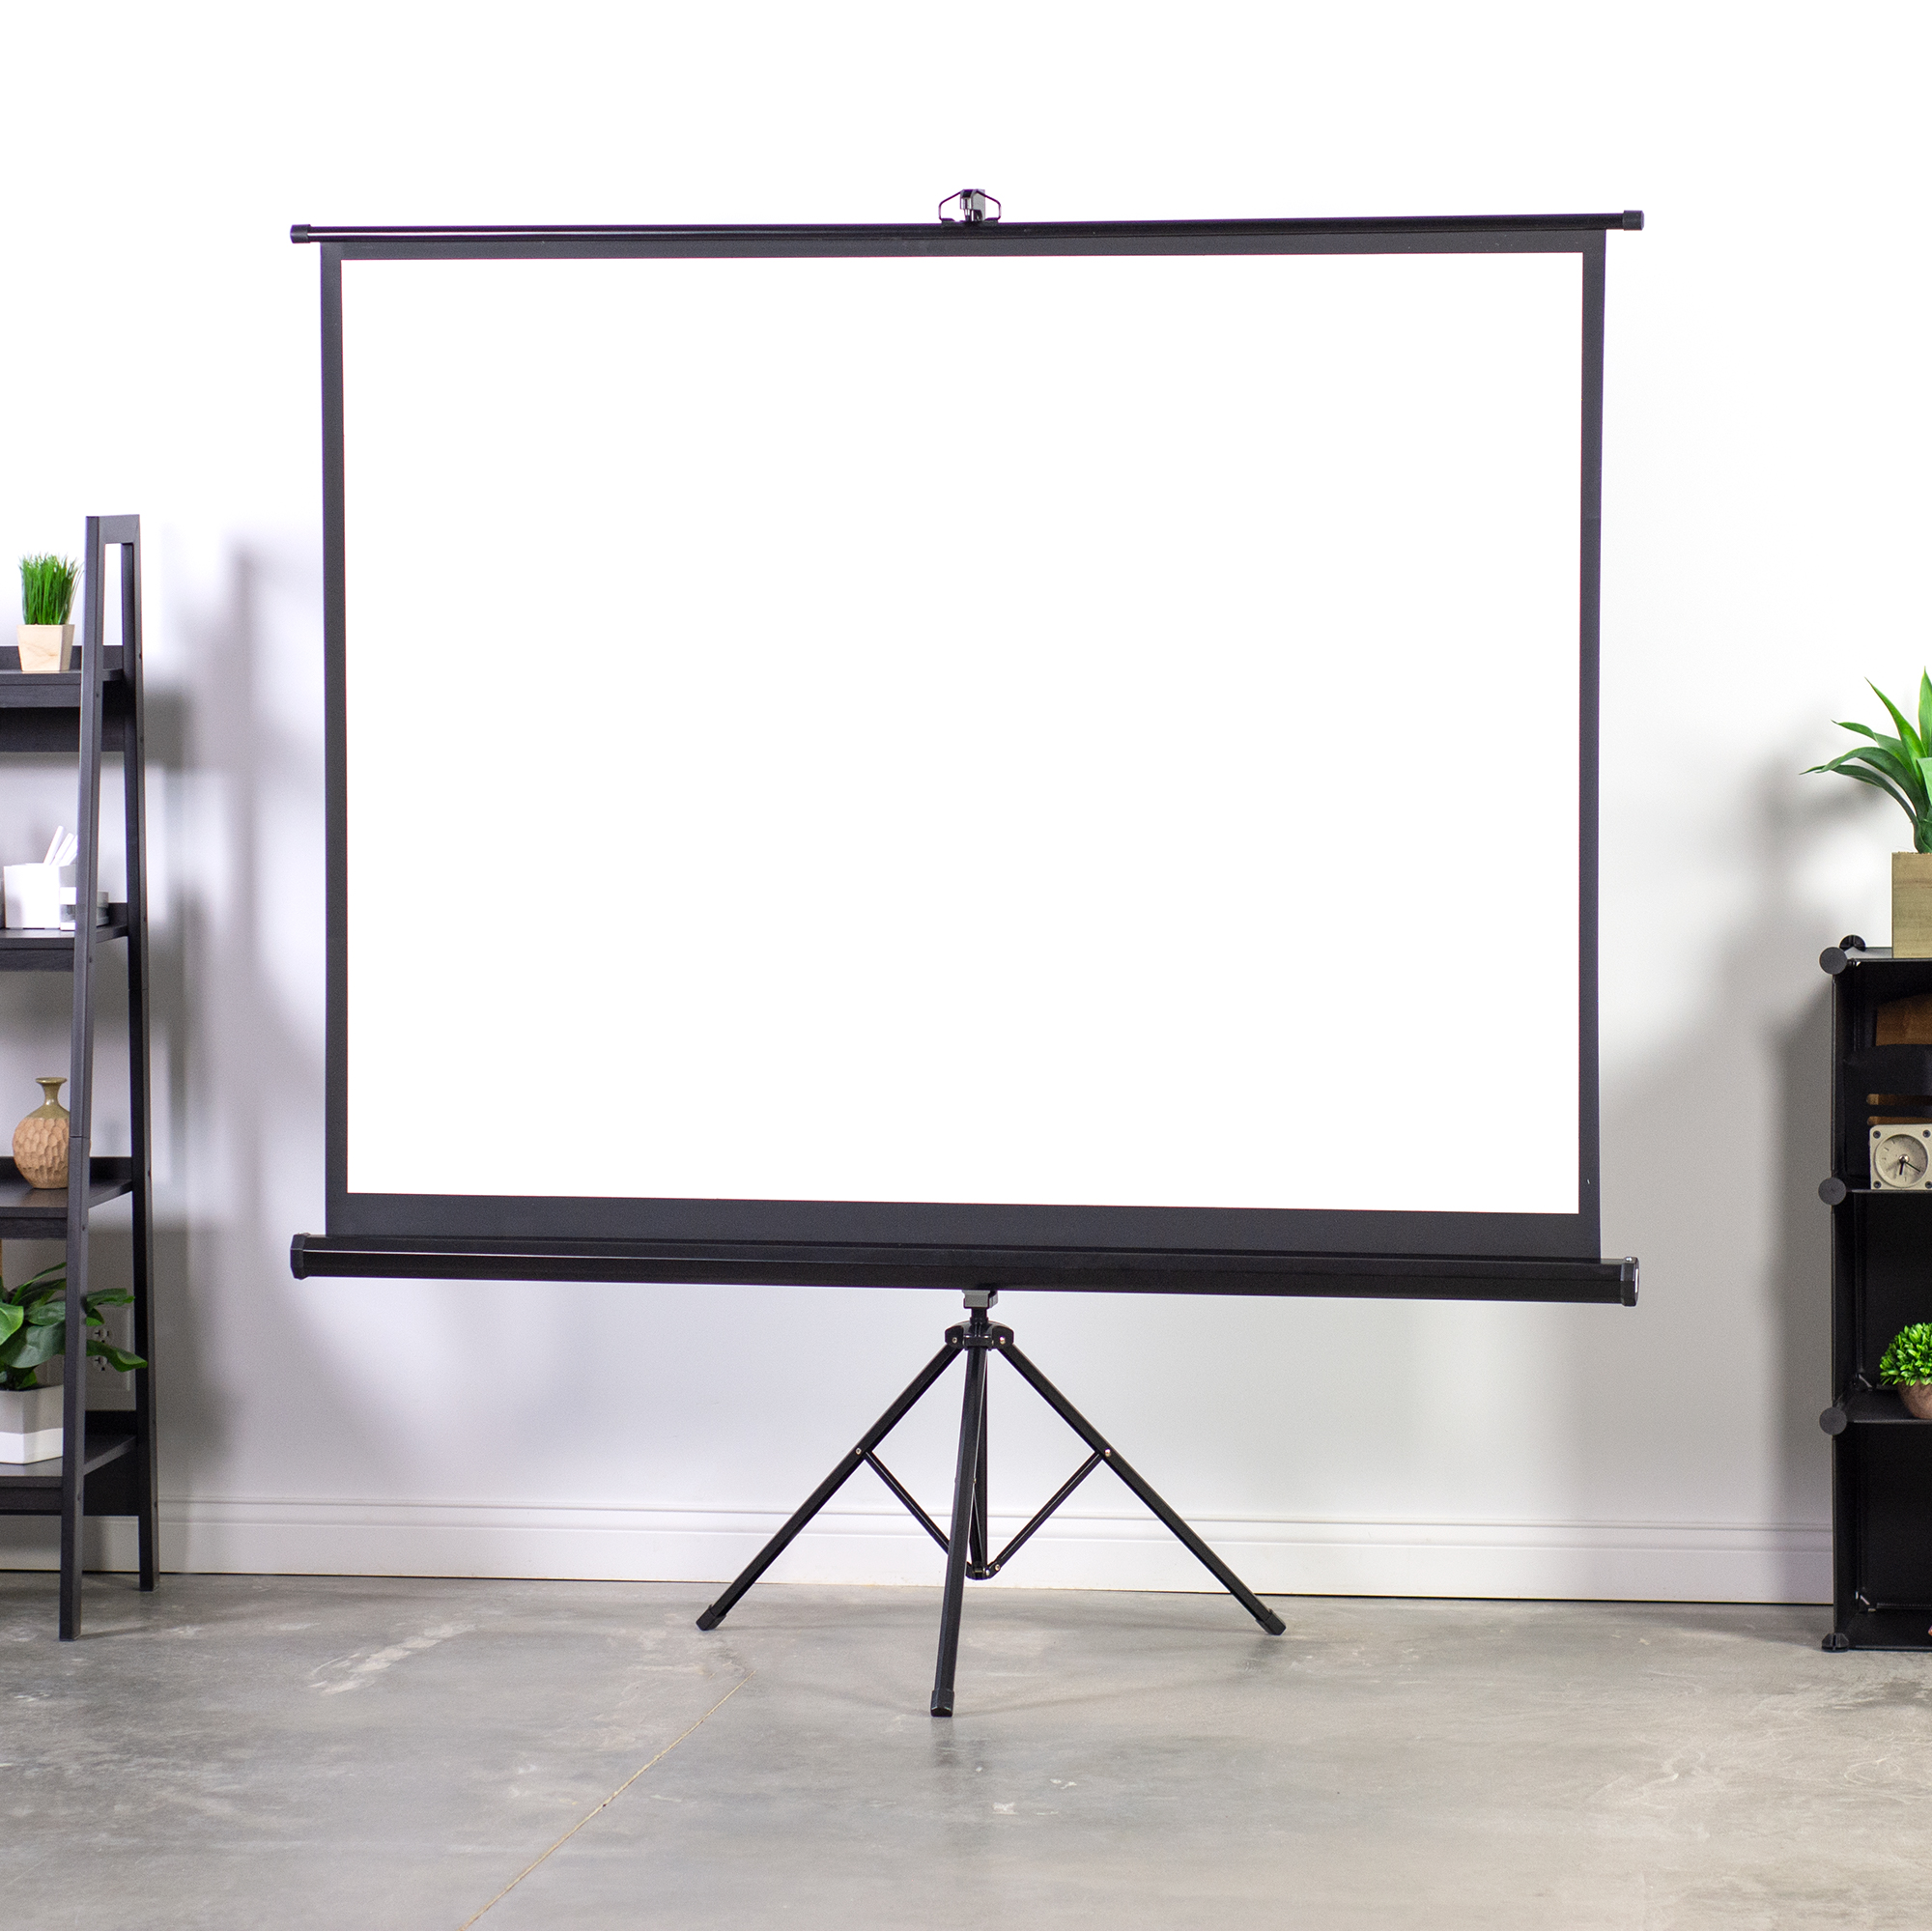 VIVO 100" Portable Projector Screen 4:3 Projection Pull Up Foldable Stand Tripod - image 5 of 6